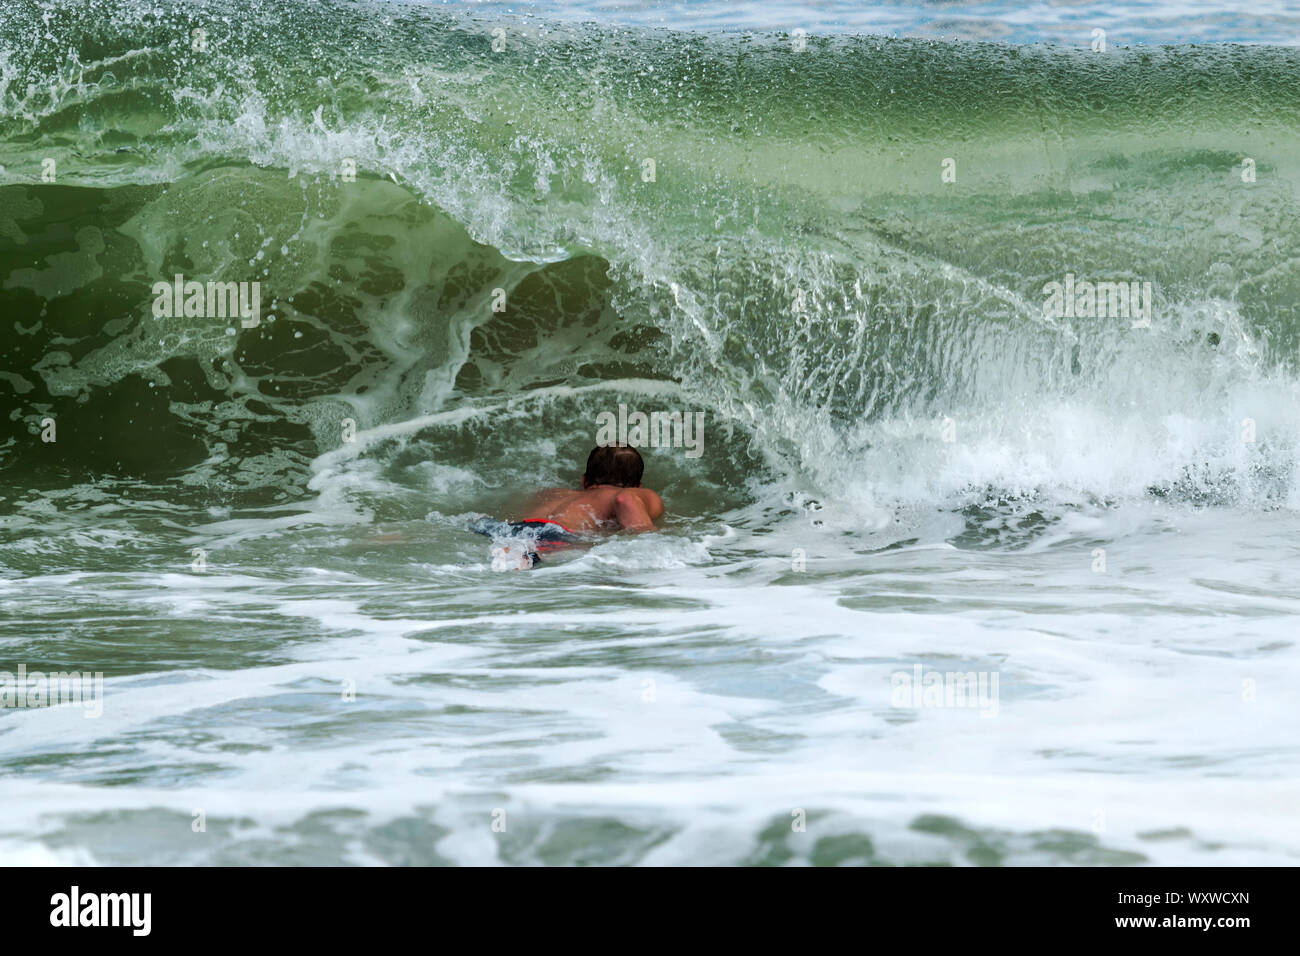 A surfer has to go under a wave, as it curls over him, to be able to get out further into the atlantic ocean off of Fire Island New York. Stock Photo